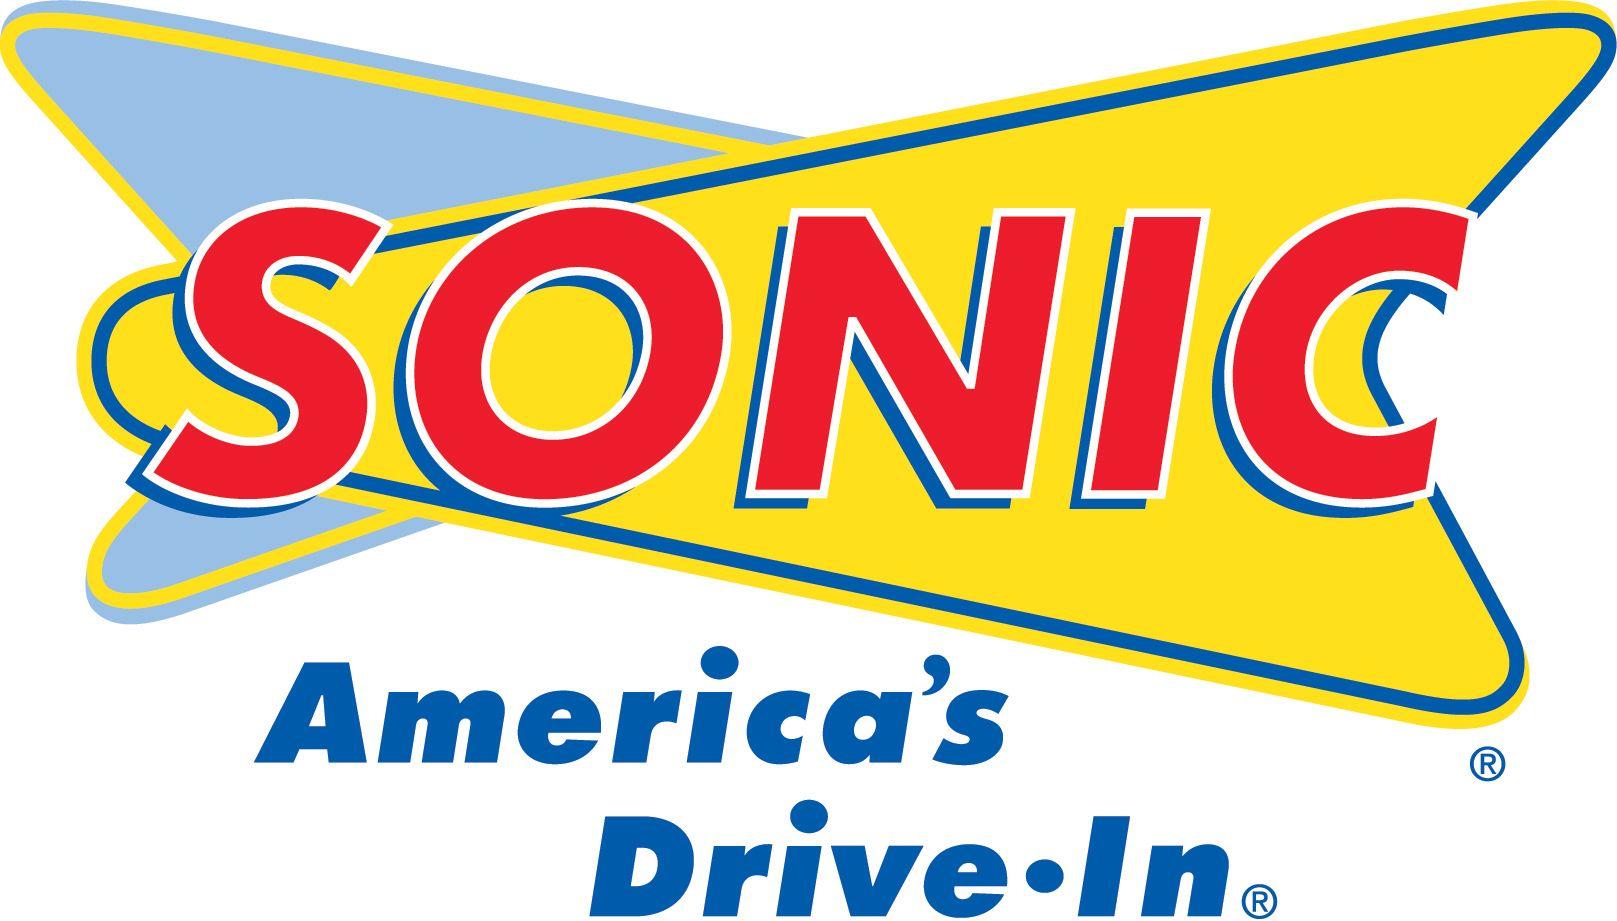 Blue and Yellow Restaurant Logo - SONIC Drive In, One Of America's Largest Restaurant Brands, Aims To